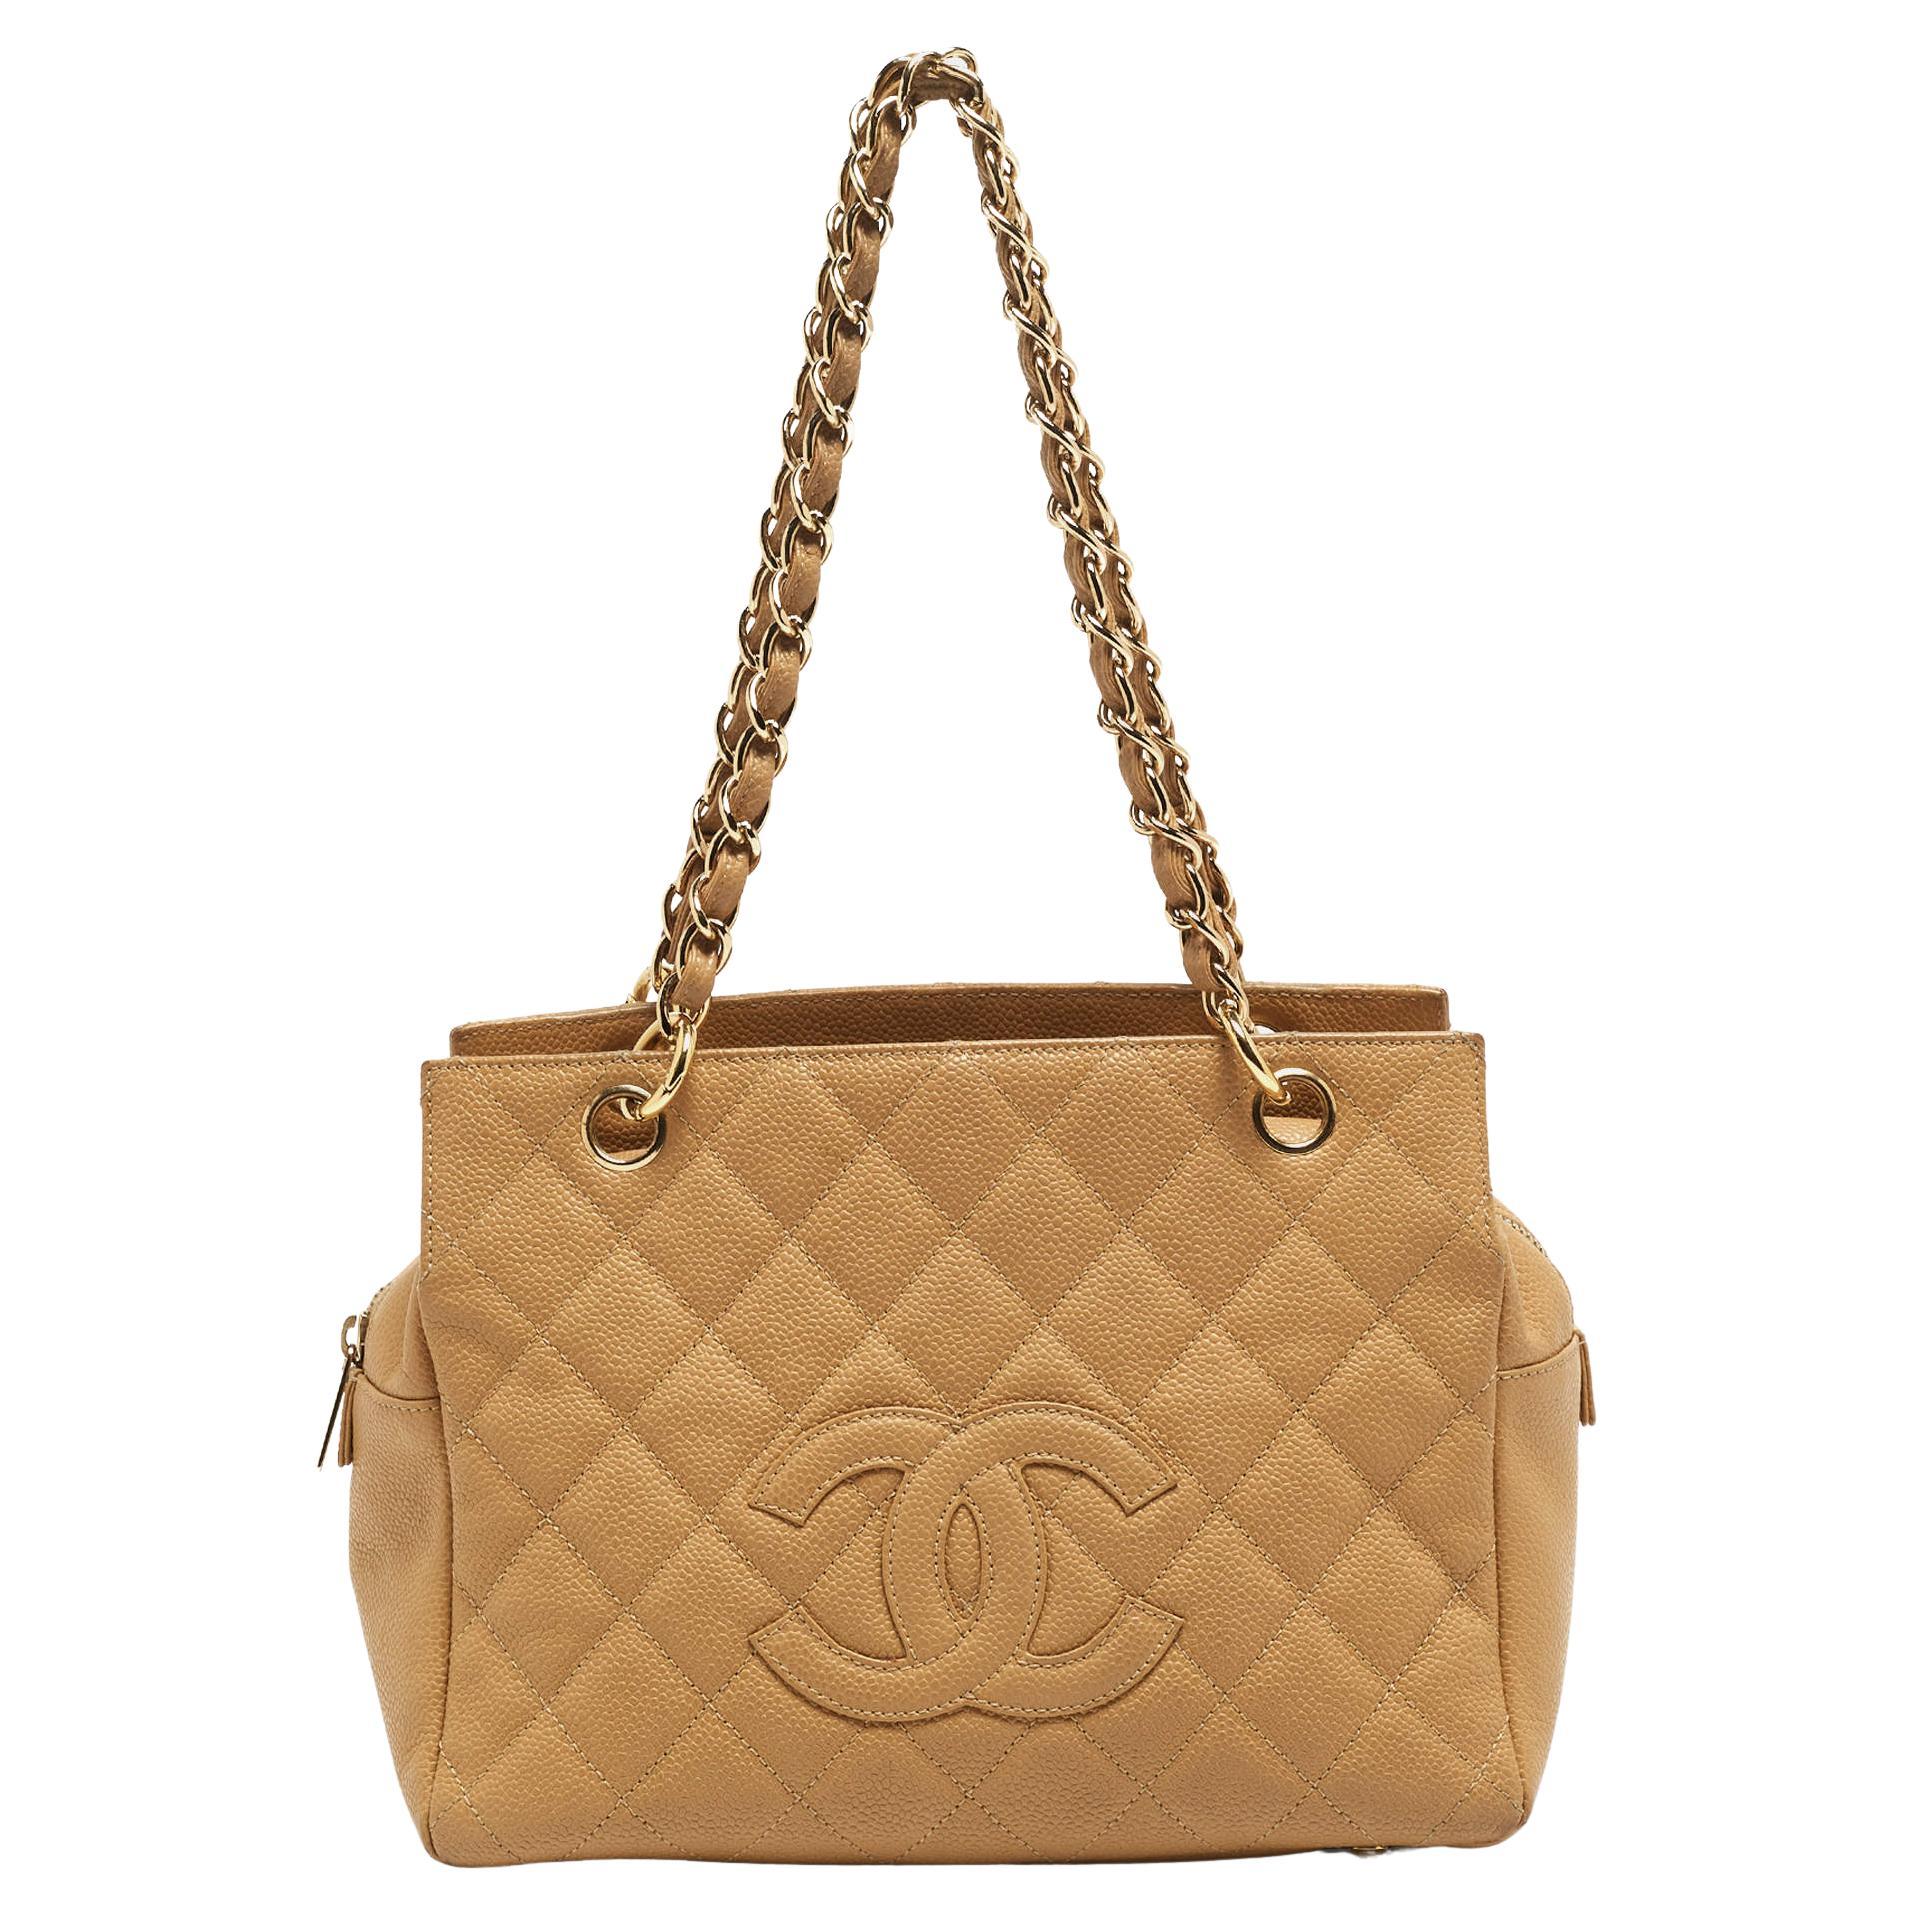 Chanel Beige Quilted Caviar Leather Petite Timeless Shopper Tote